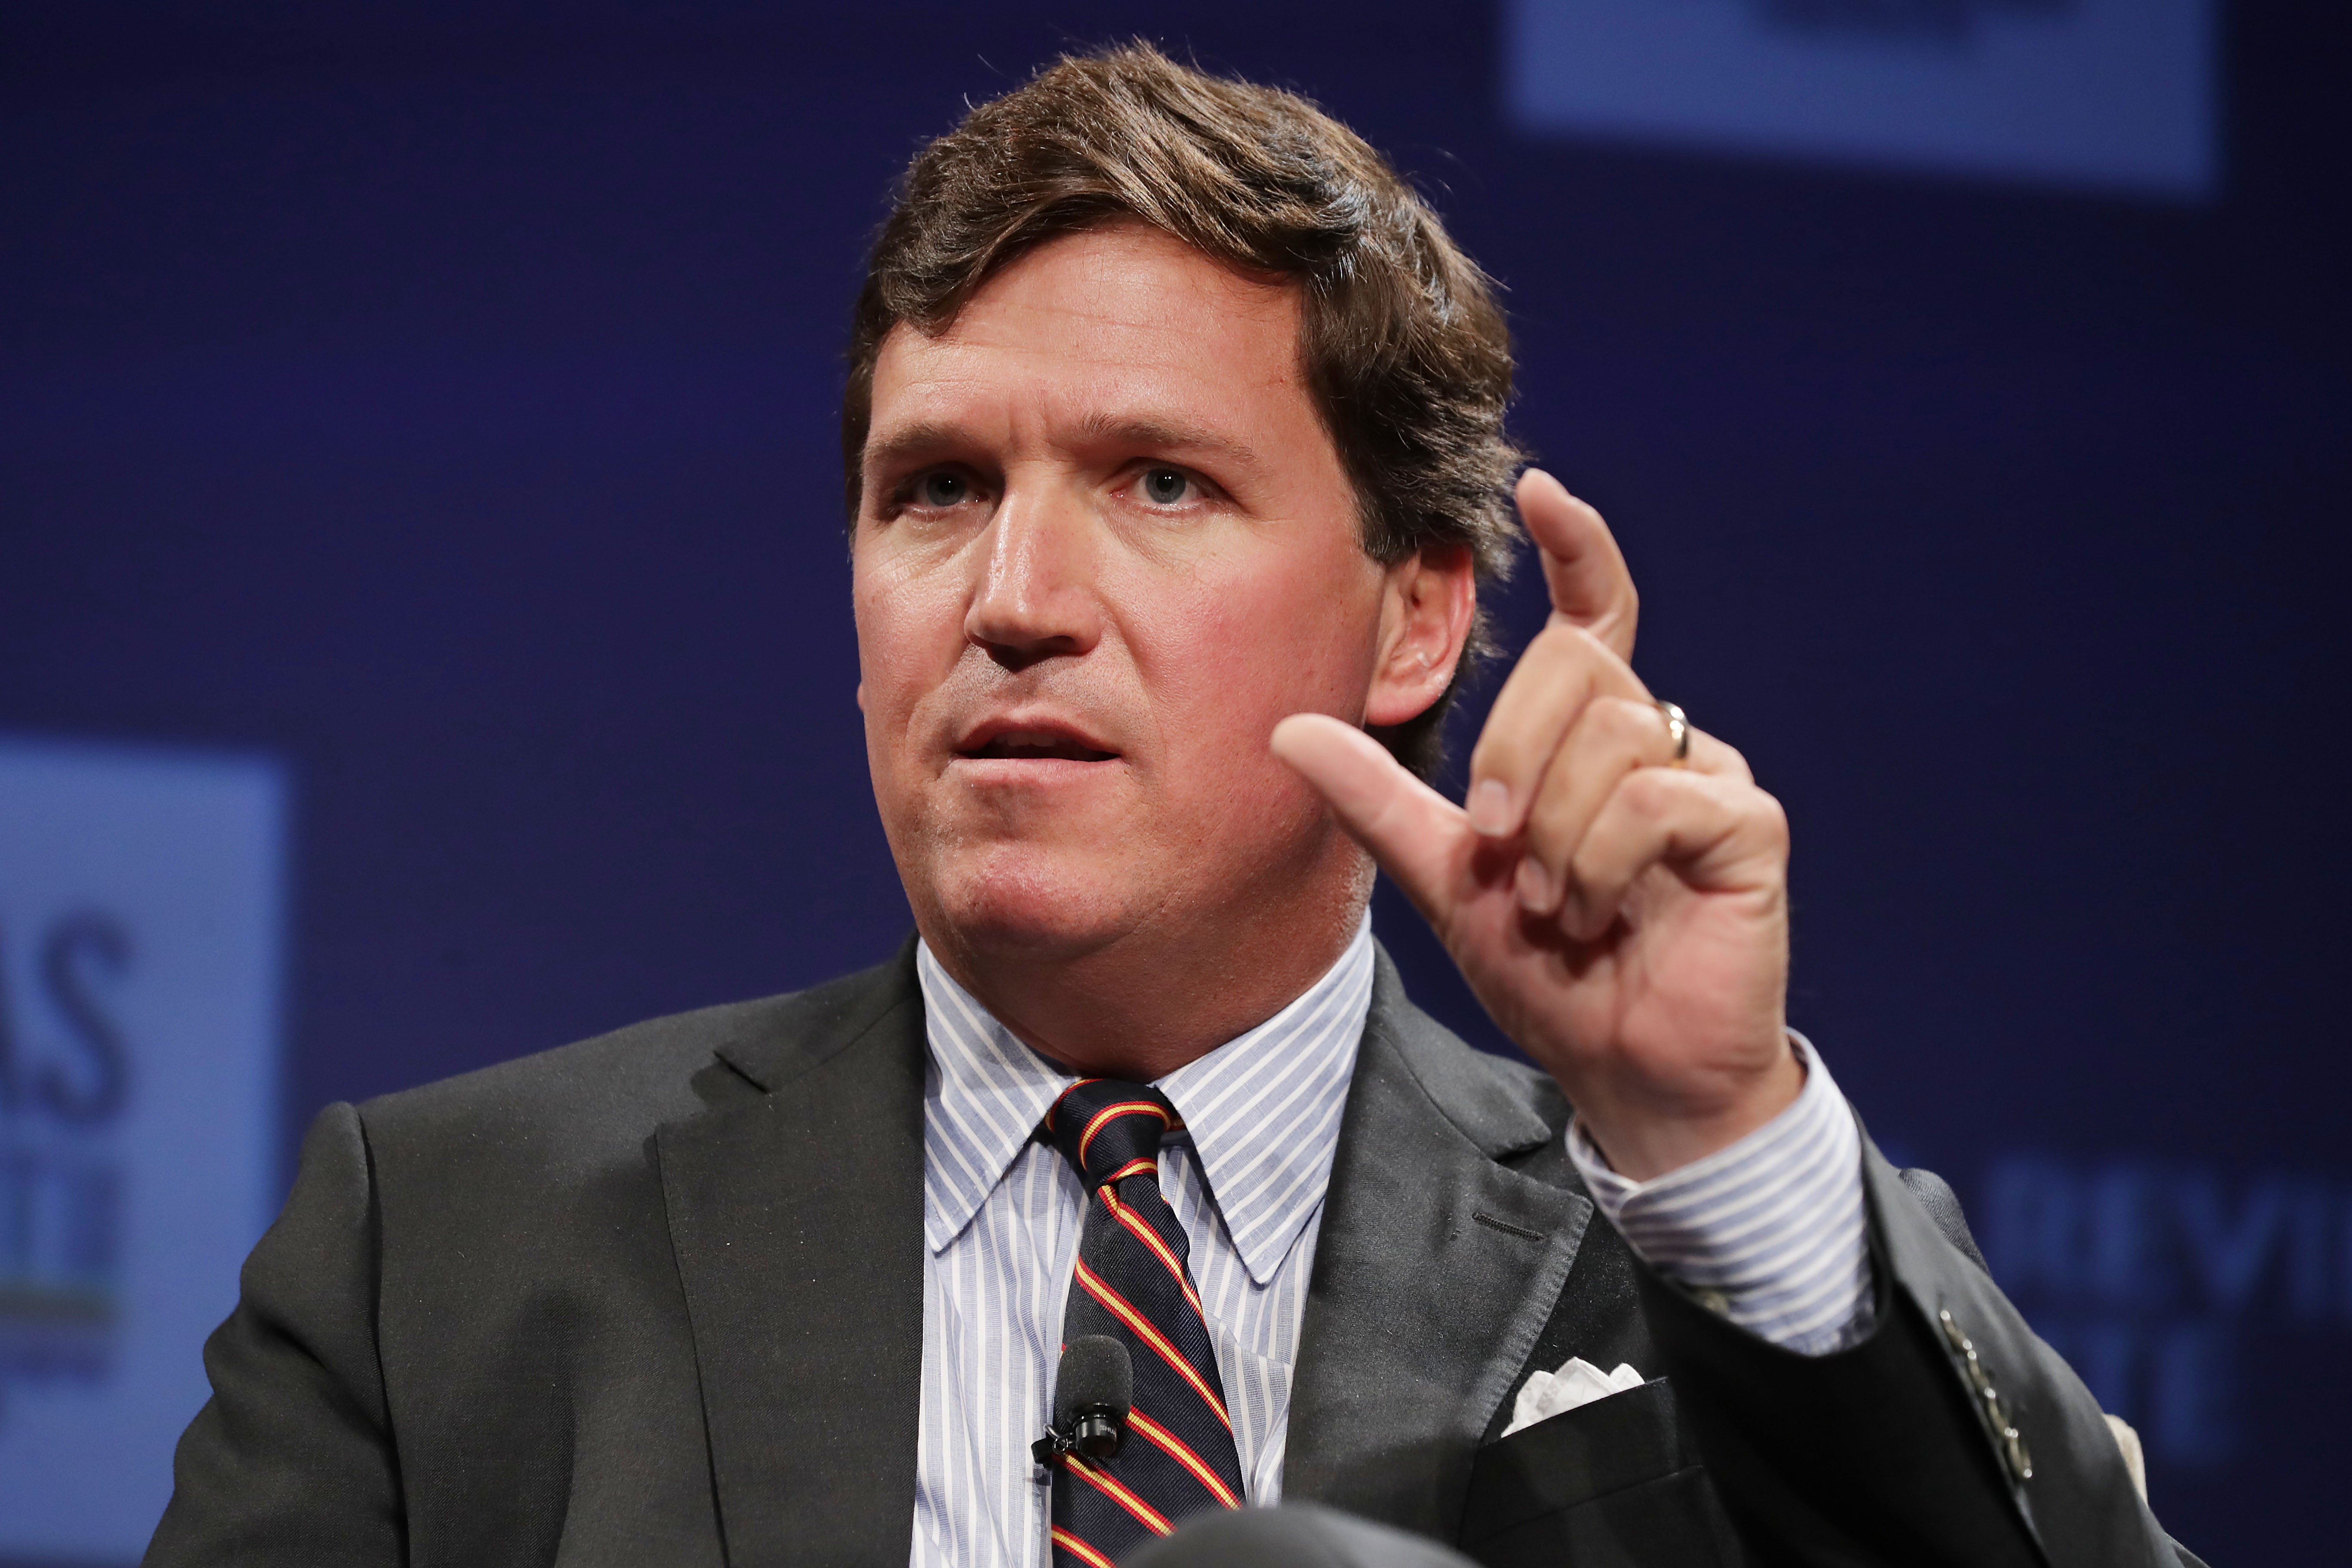 Tucker Carlson discusses ‘Populism and the Right’ during the National Review Institute’s Ideas Summit at the Mandarin Oriental Hotel March 29, 2019 in Washington, DC.